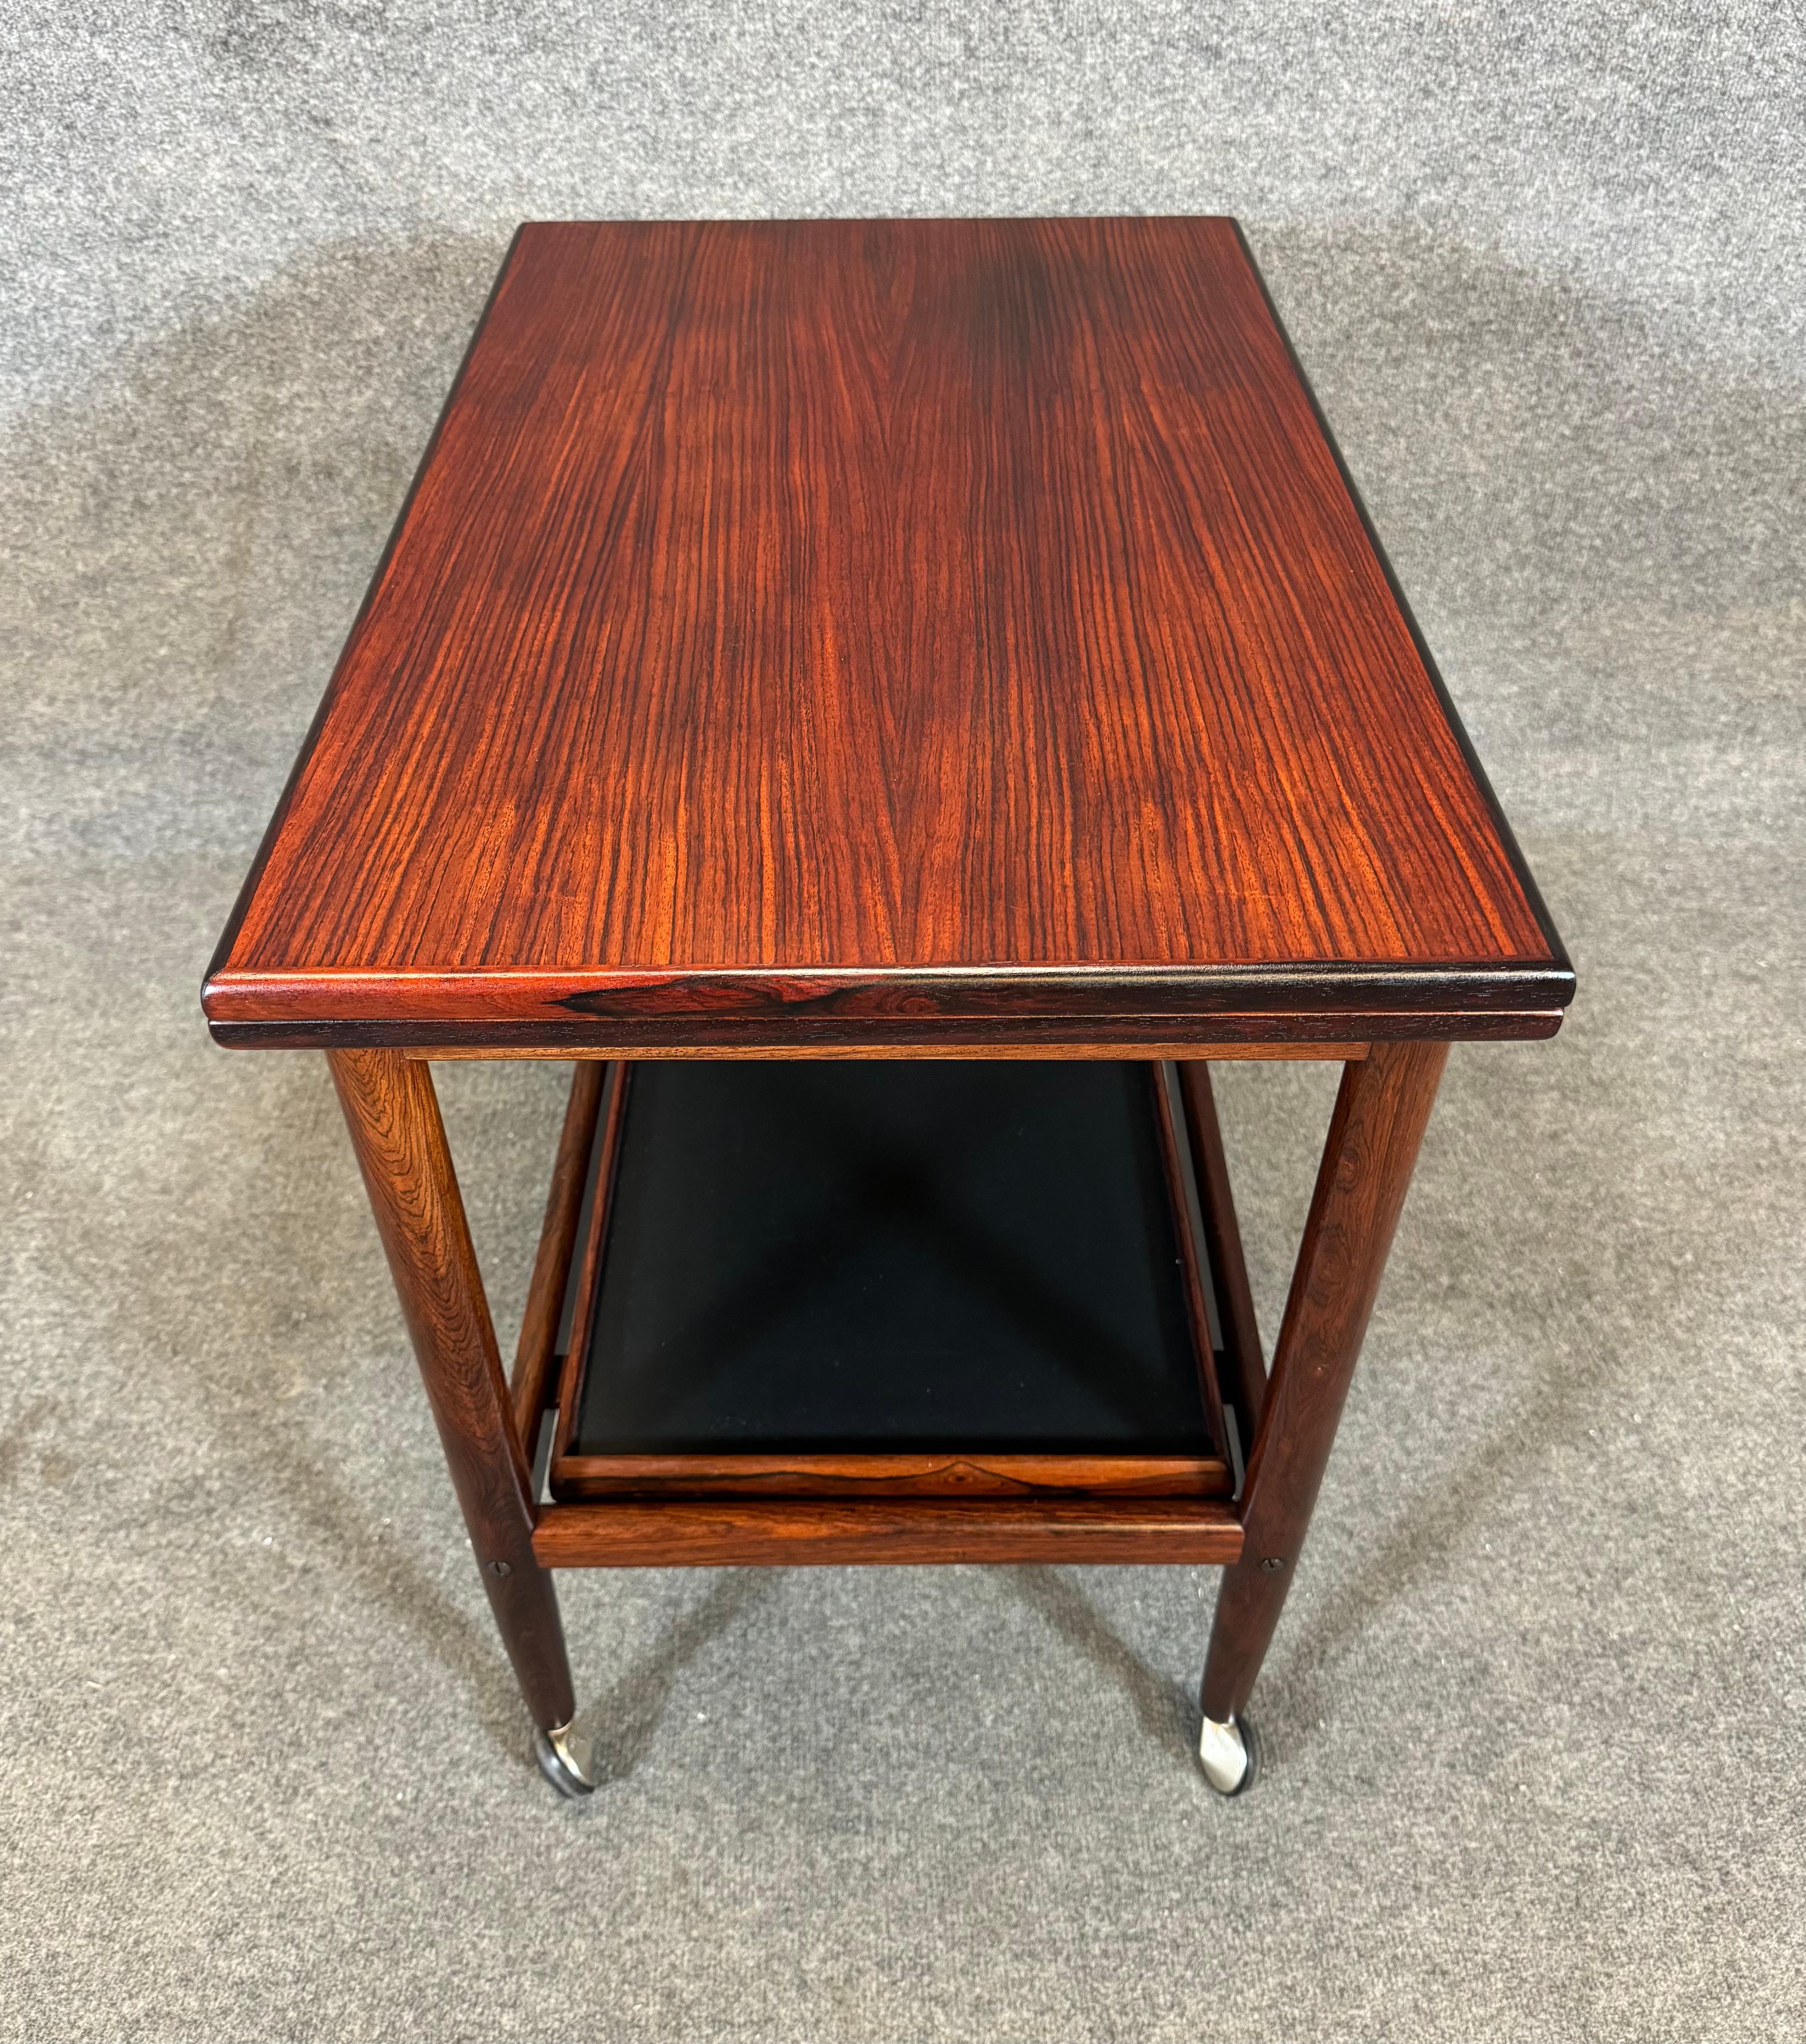 Here is a beautiful scandinavian modern cocktail cart in rosewood designed by Grete Jalk and manufactured by Poul Jeppesen in Denmark in the 1960's.
This exquisite piece, recently imported from Europe to California before its refinishing, features a